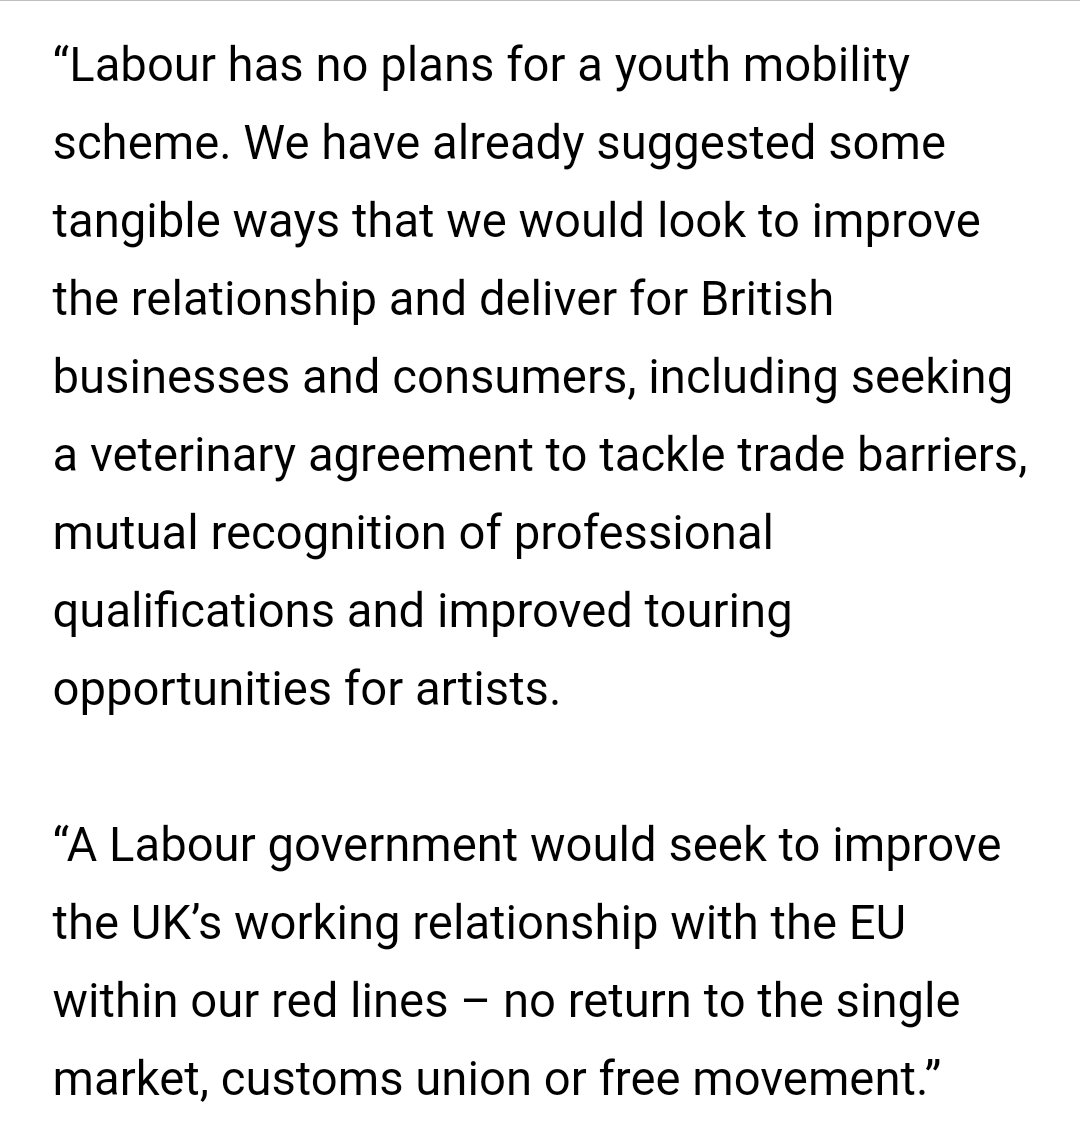 The response from the Labour Party, on the proposed Youth Mobility Scheme from the EU, is very interesting indeed.